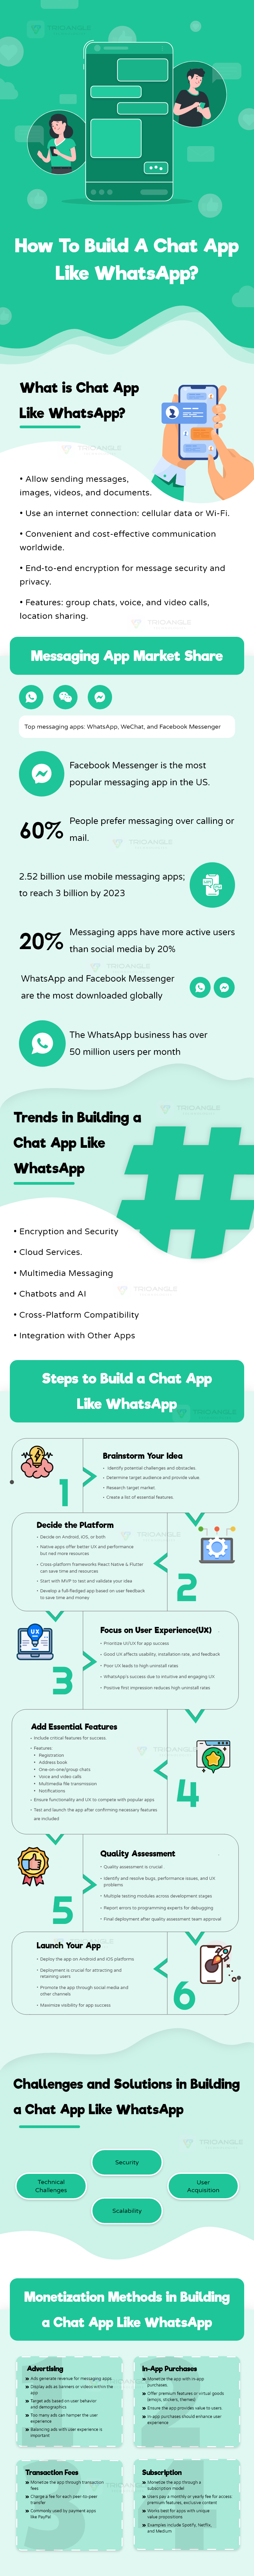 https://www.trioangle.com/blog/how-to-build-a-chat-app-like-whatsapp/